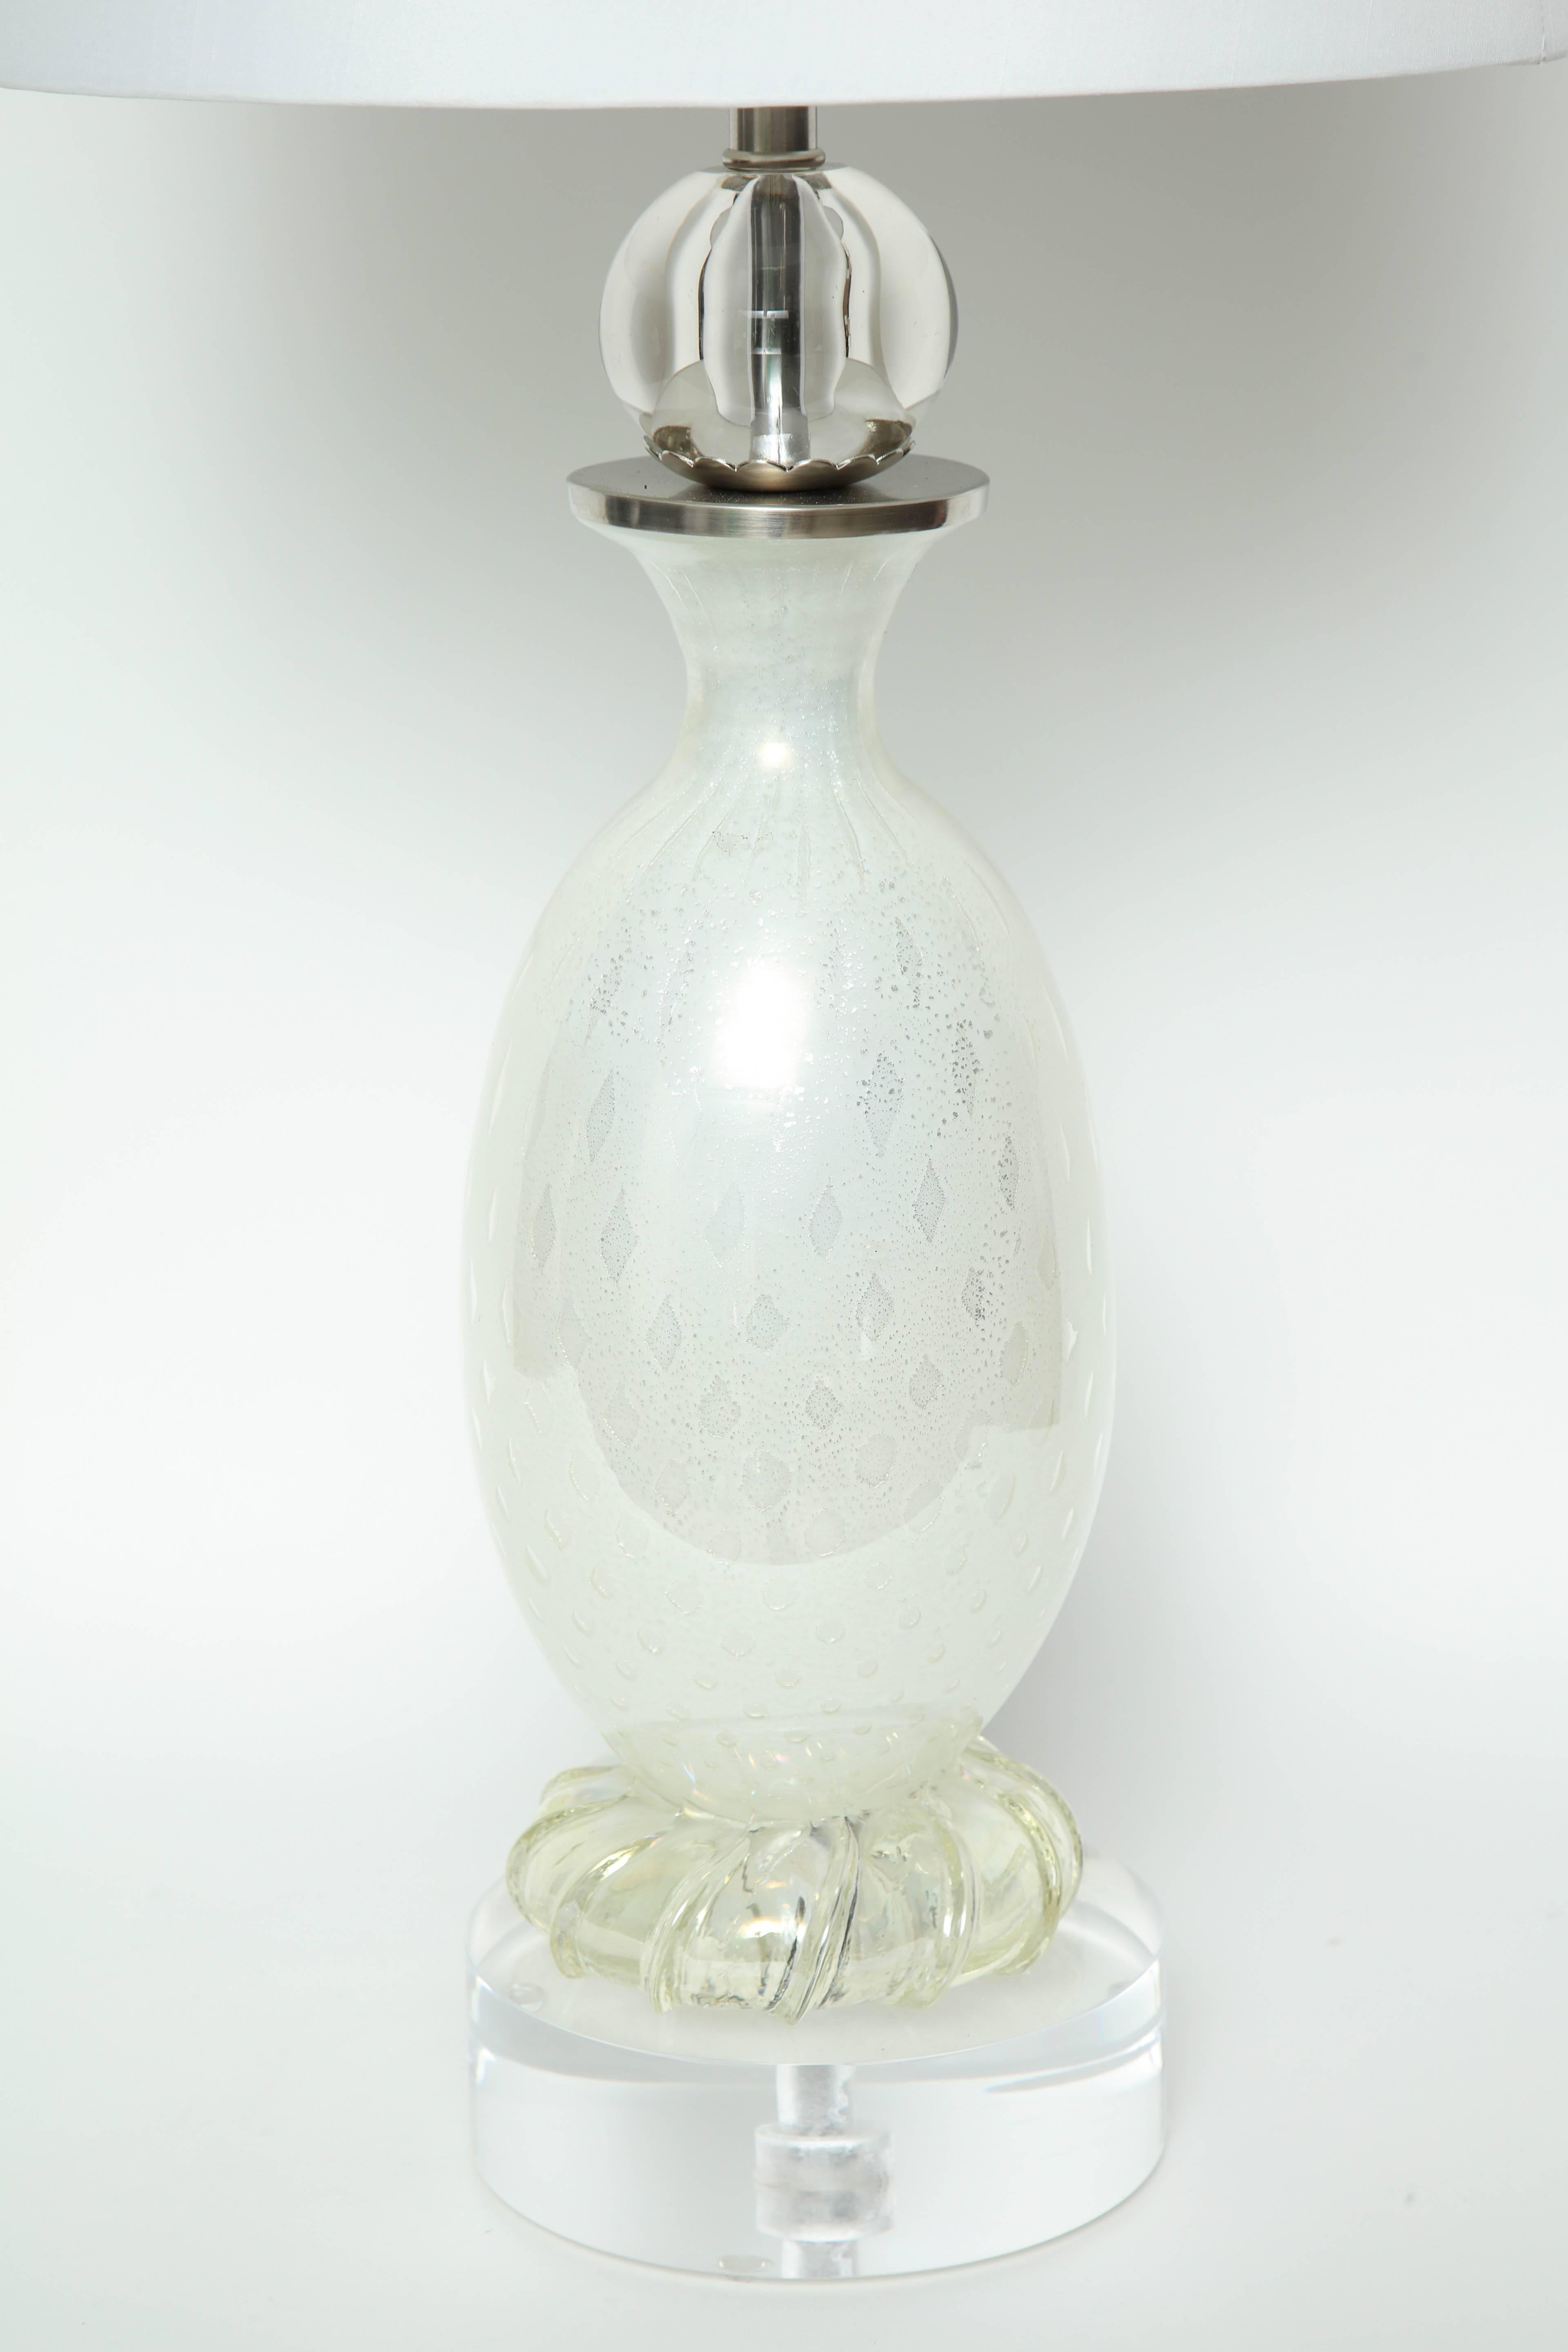 Mid-Century Murano glass lamps in a pearl white color with silver flecking throughout. Lamps feature a subtle dot pattern composed of silver flecking and a solid glass sphere element at top. Lamps have been rewired for use in the USA and have been